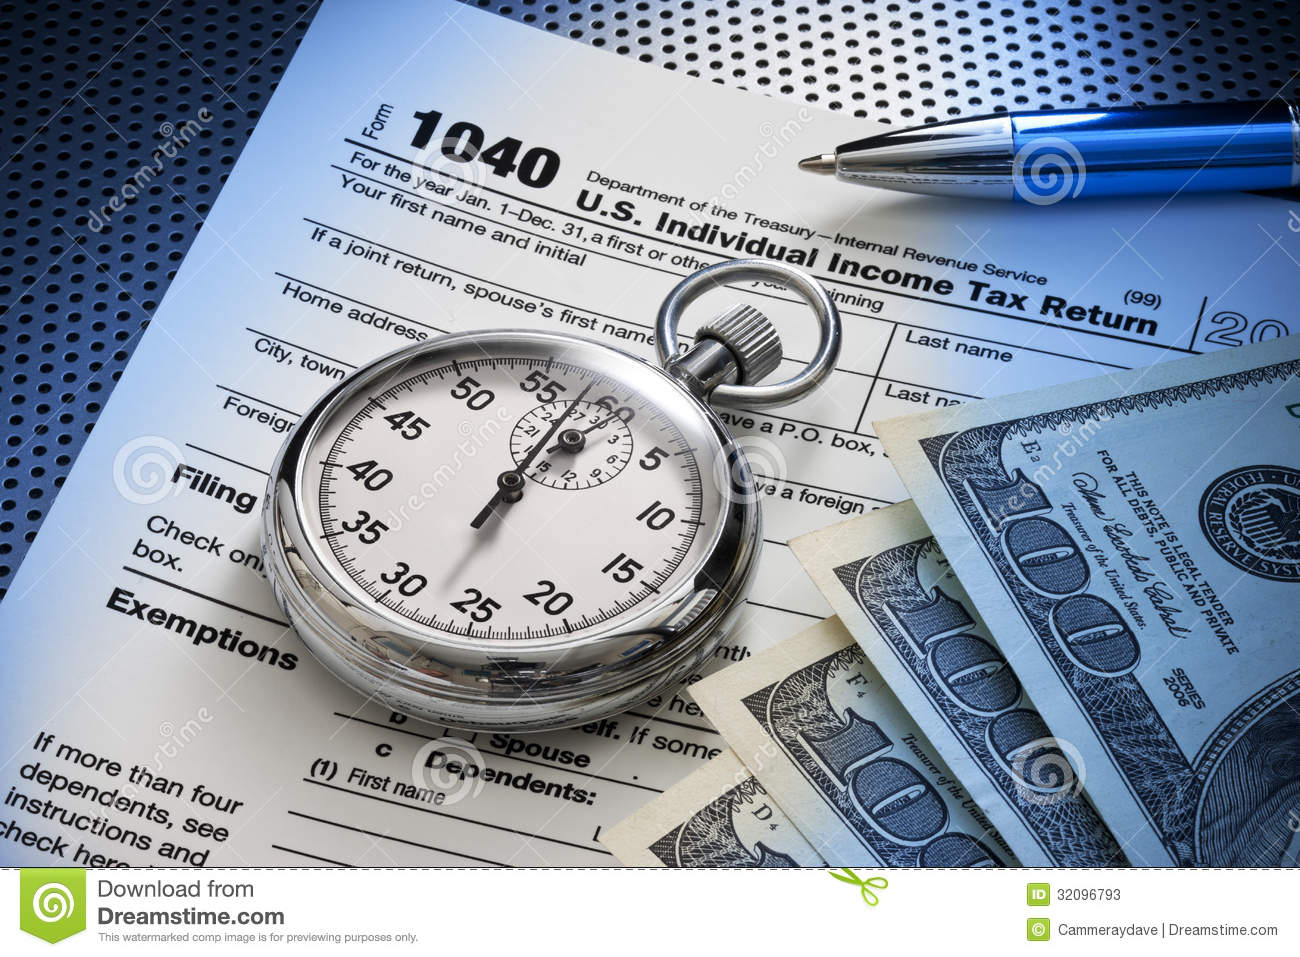 Still Life Of A Us 1040 Tax Form With Stopwatch Money And Pen